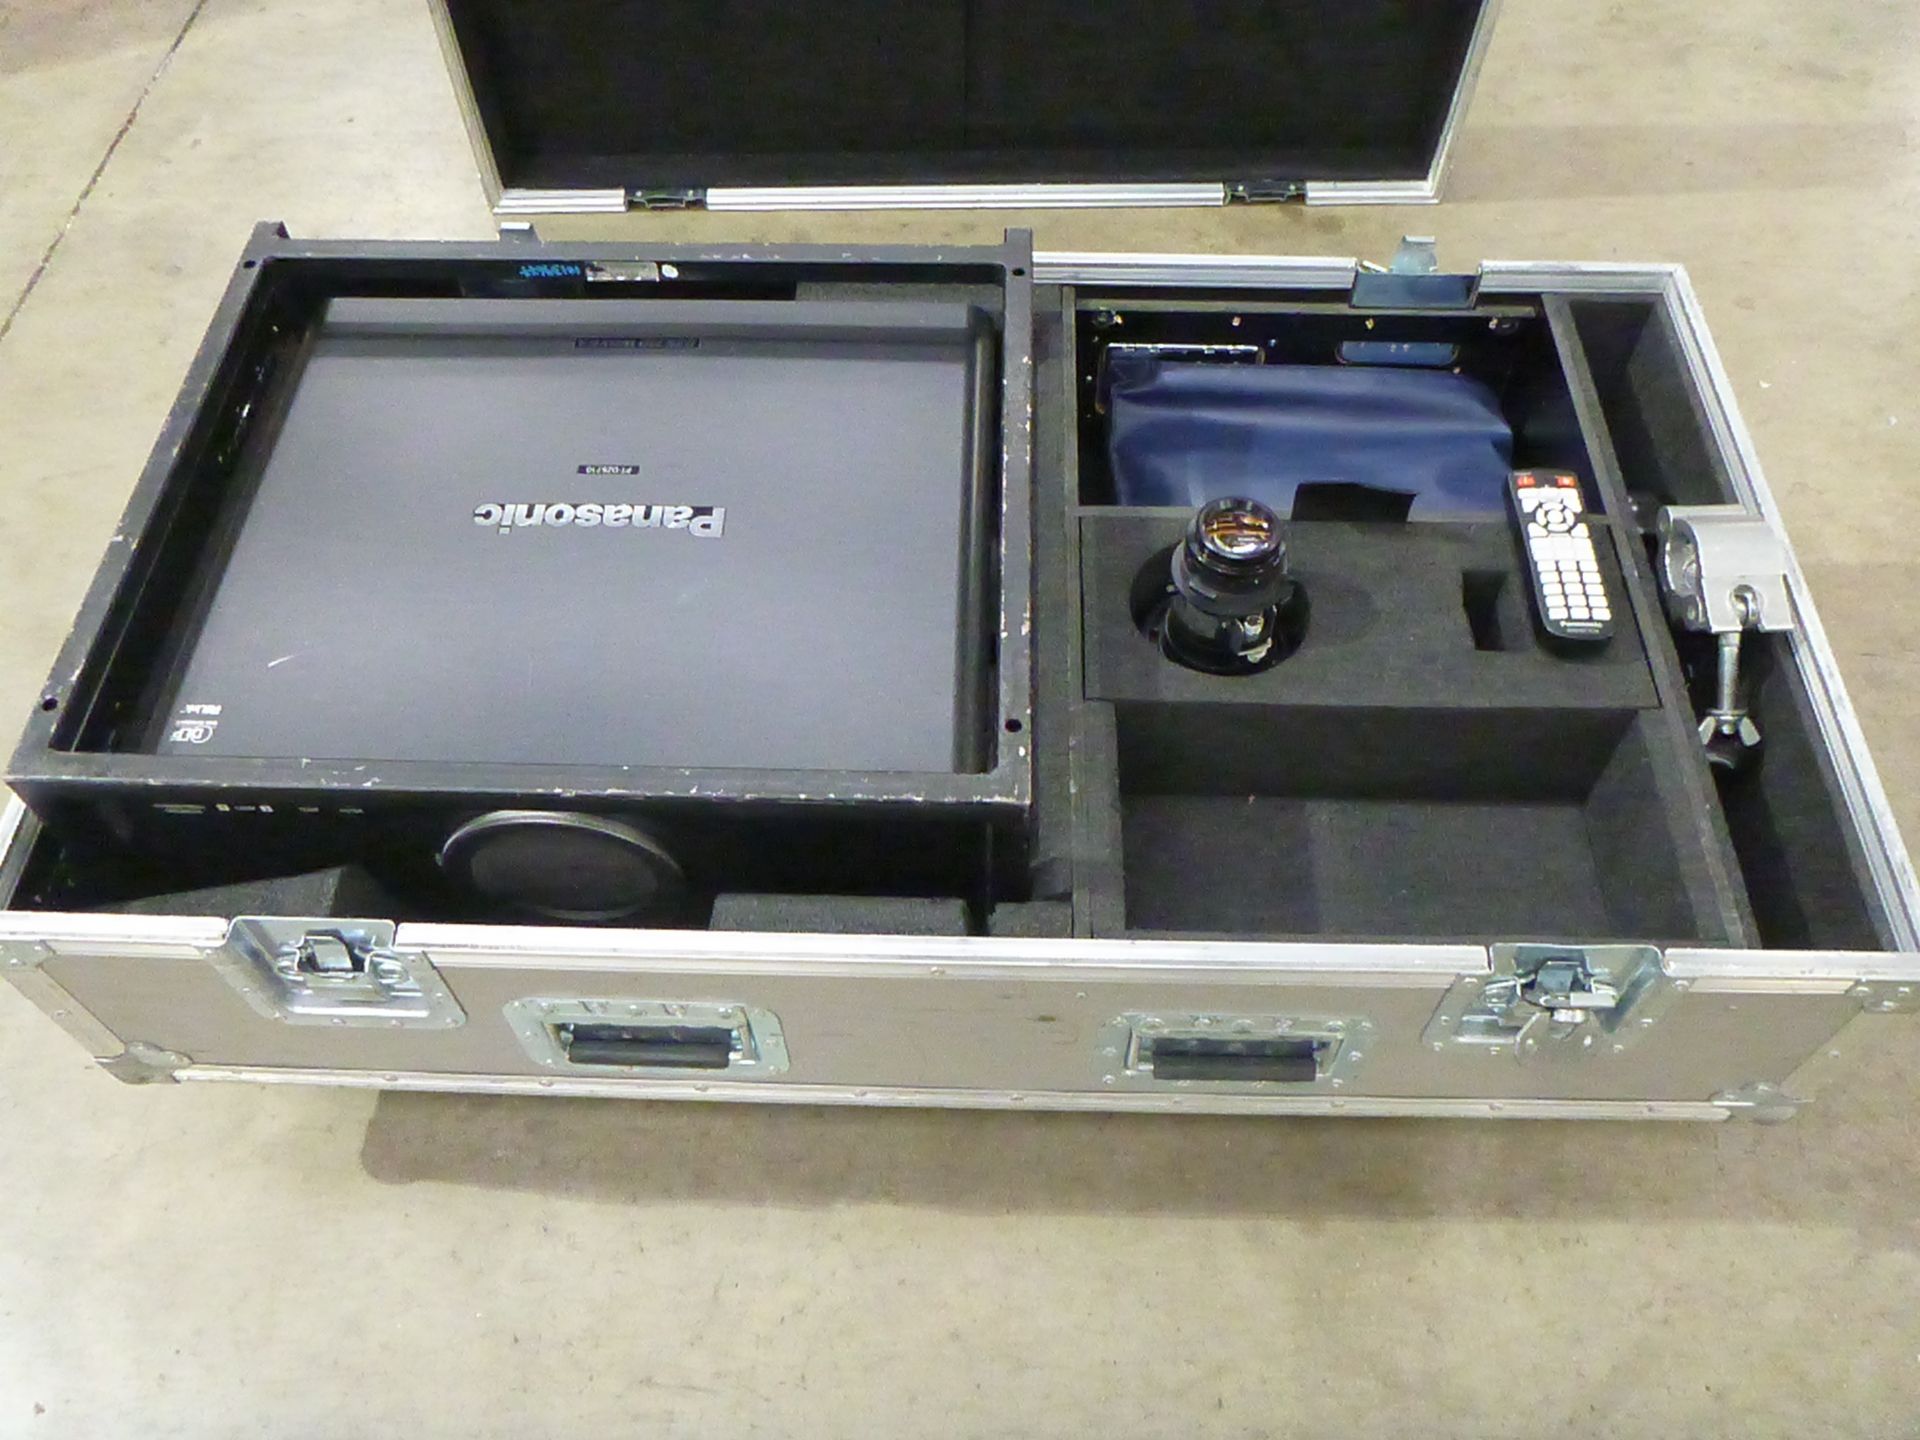 Panasonic Projector, Model PT-DZ6710E, S/N SH0150007, YOM 2010, In flight case with standard 1.3-1. - Image 12 of 13